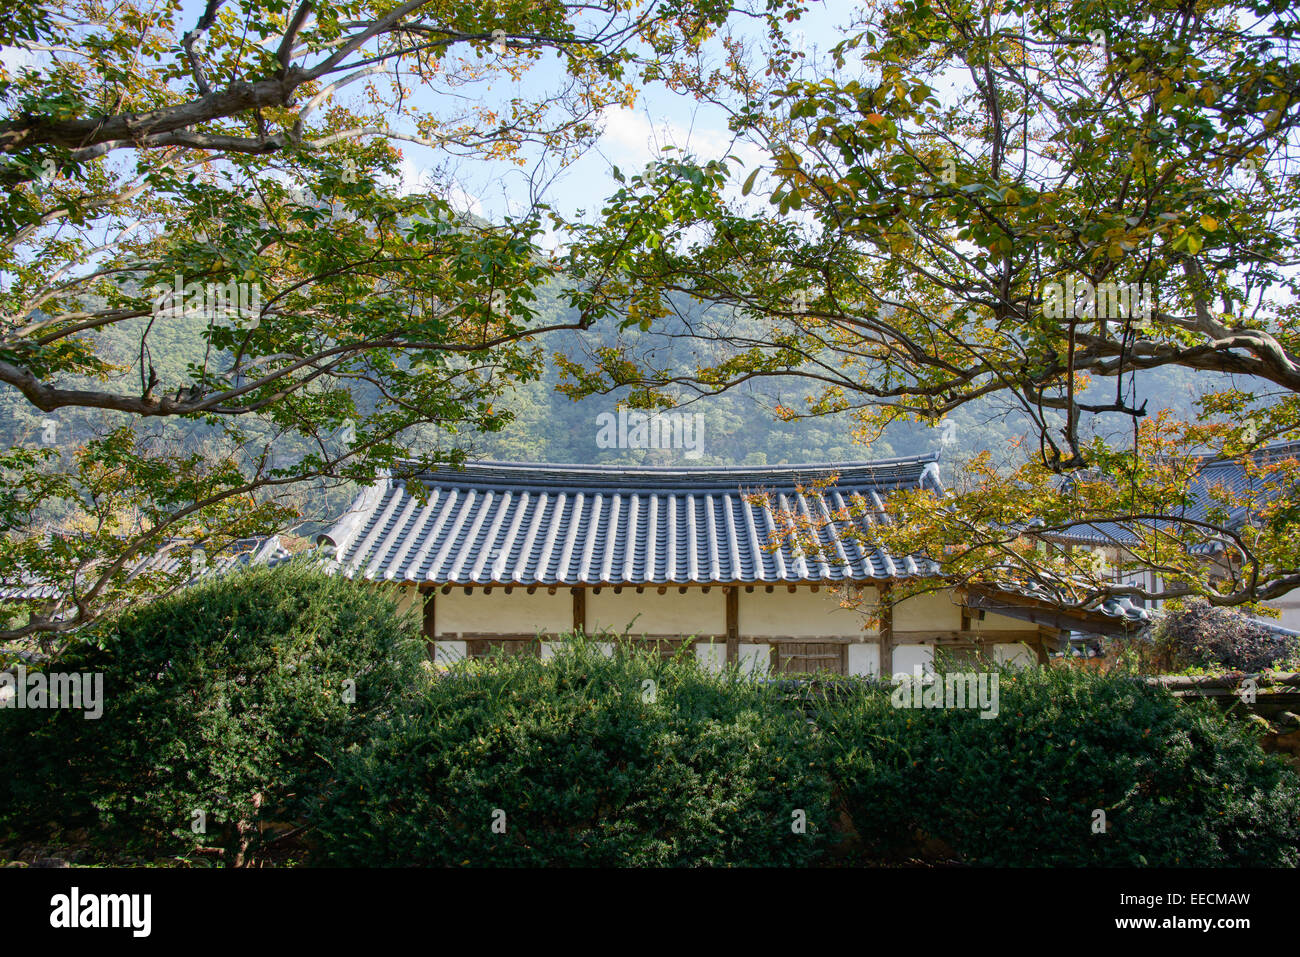 Korean traditional tiled roof with crape mytle tree Stock Photo